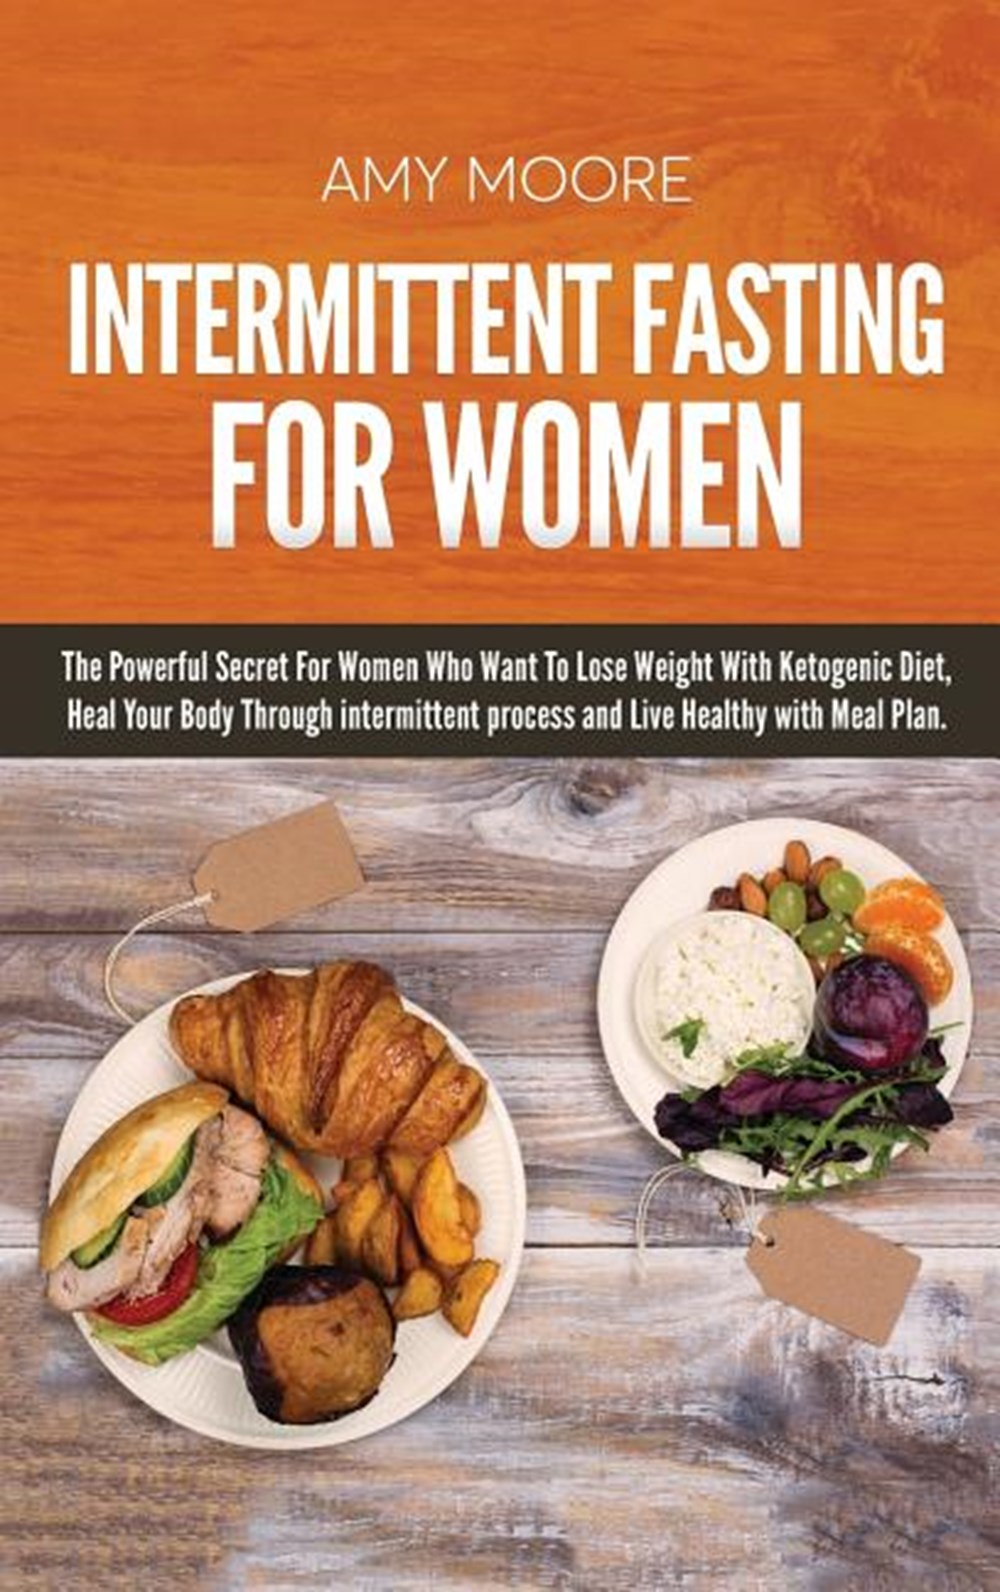 Intermittent Fasting For Women: The Powerful Secret For Women Who Want To Lose Weight With Ketogenic